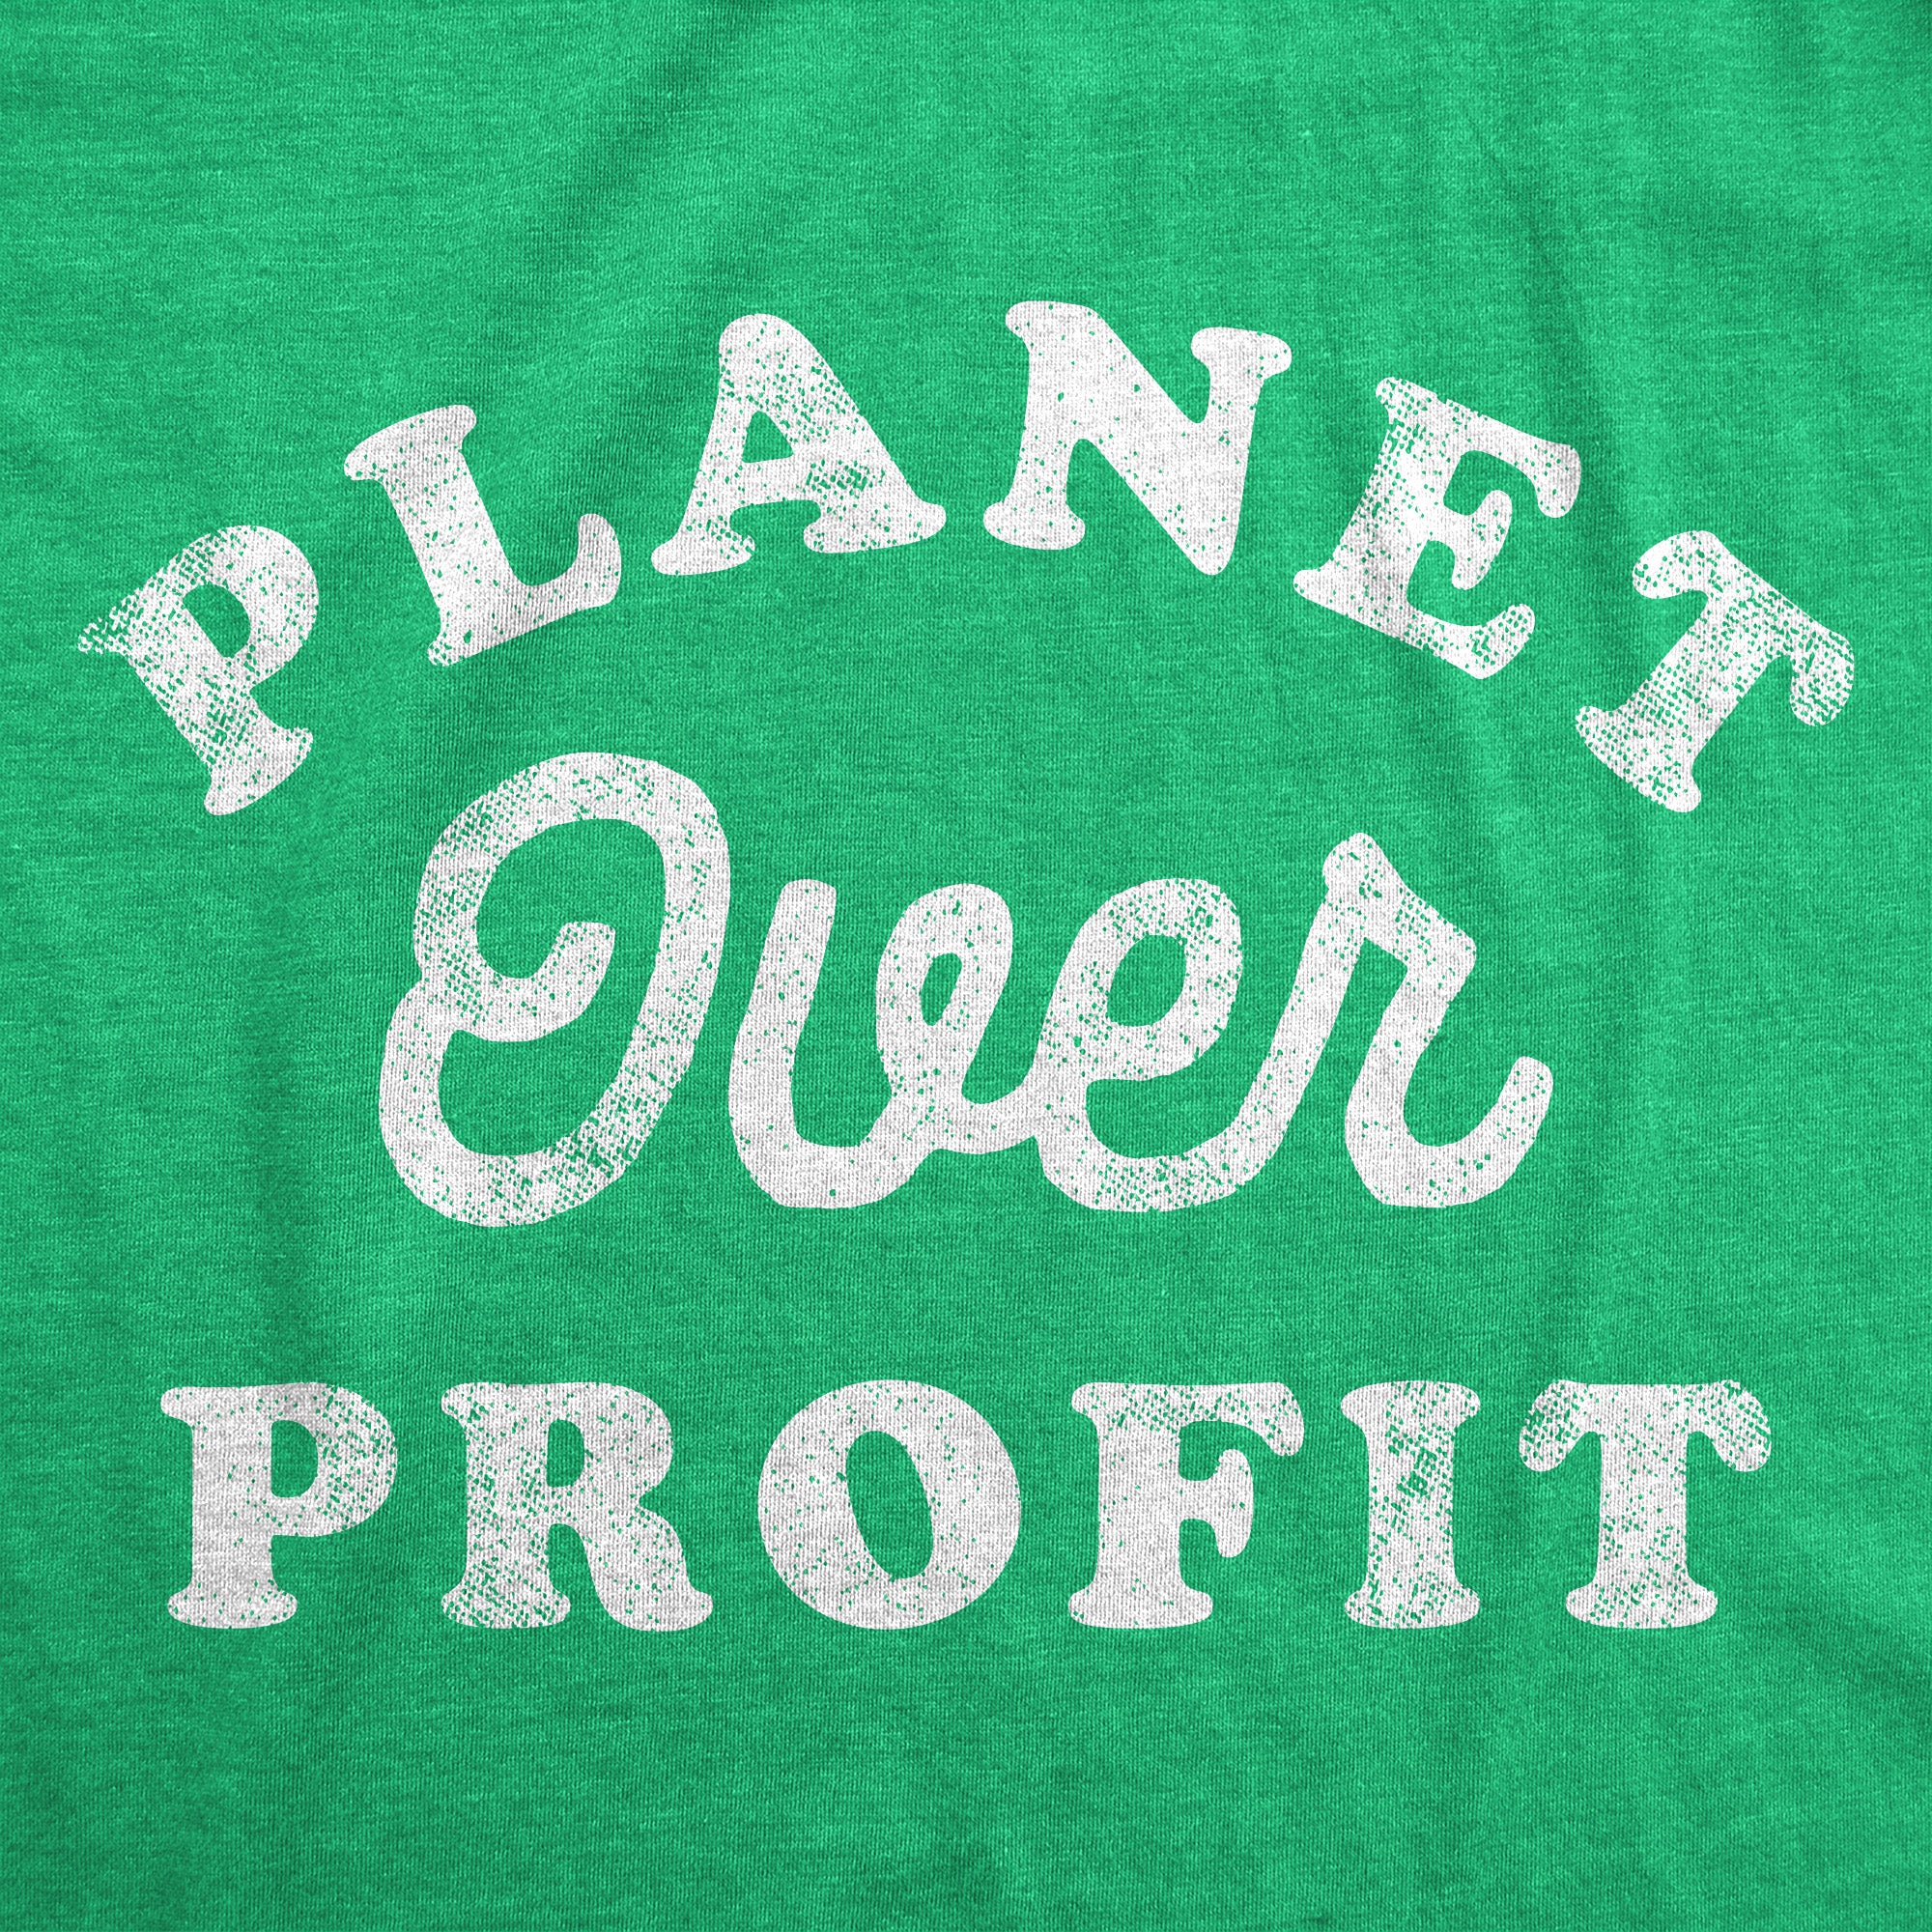 Funny Heather Green - Planet Over Profit Planet Over Profit Womens T Shirt Nerdy Earth Tee